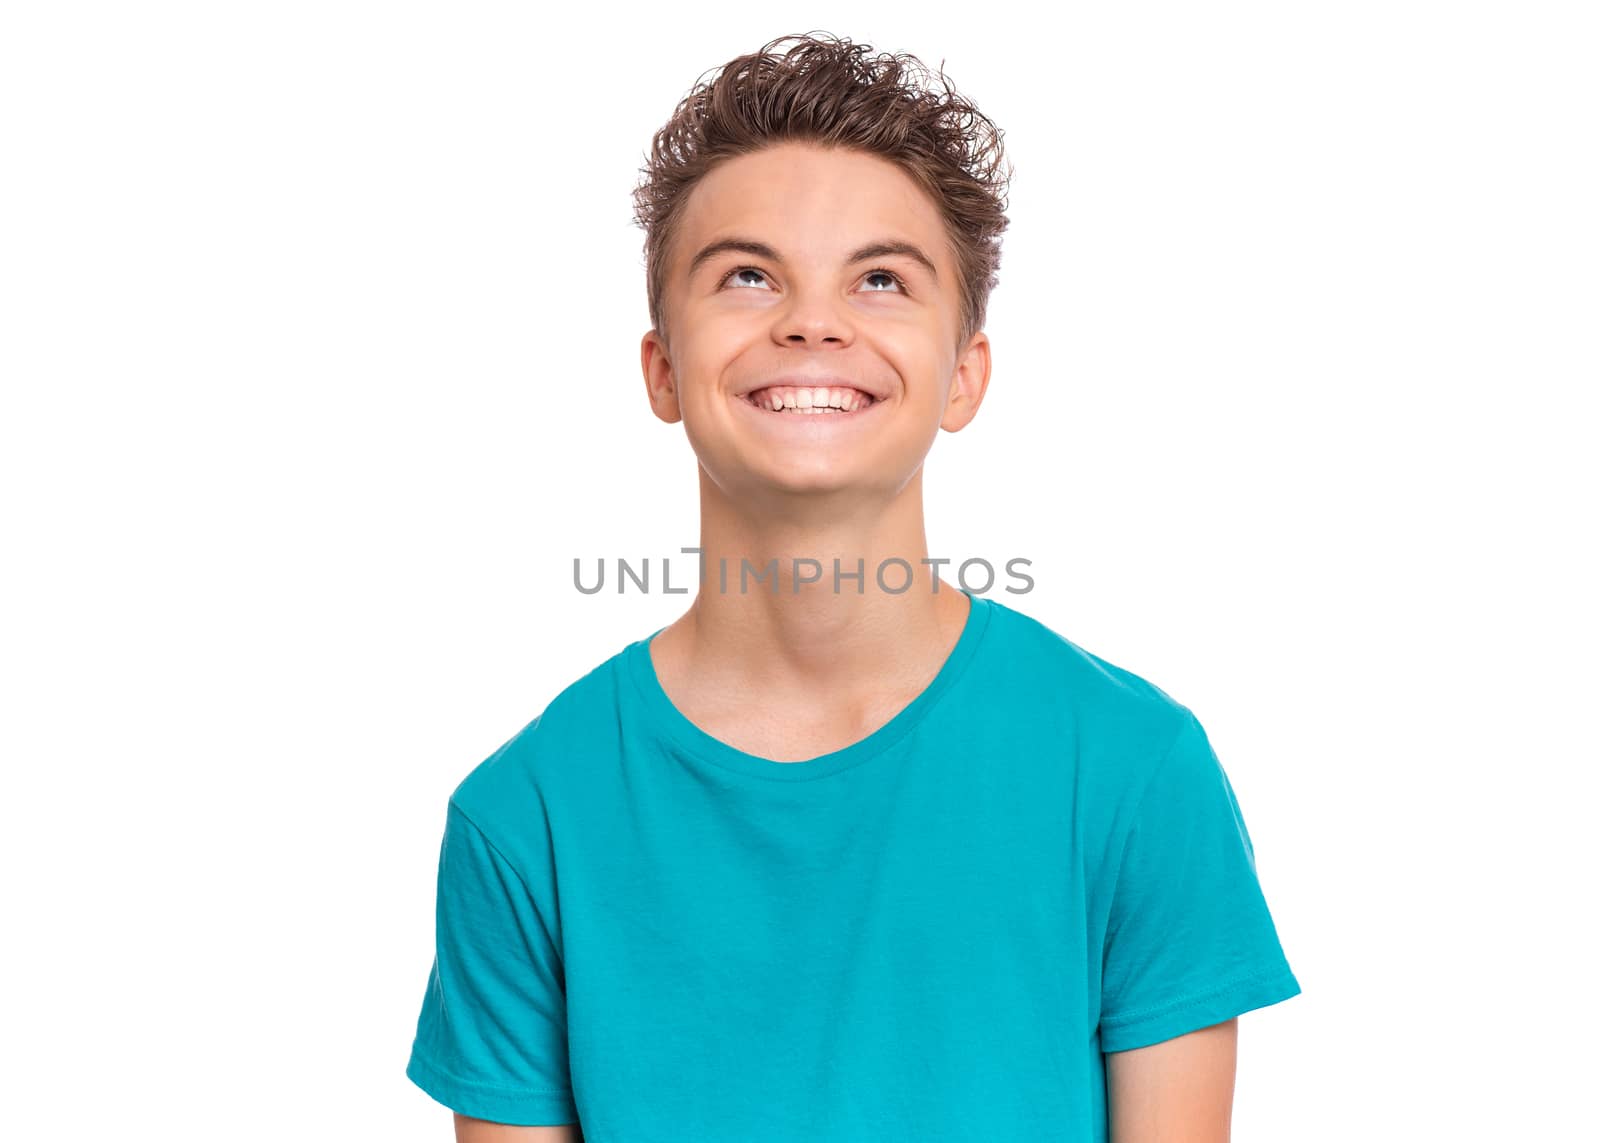 Handsome caucasian Teen Boy in blue t-shirt, isolated on white background. Teenager looking up and smiling. Happy child - close-up portrait.